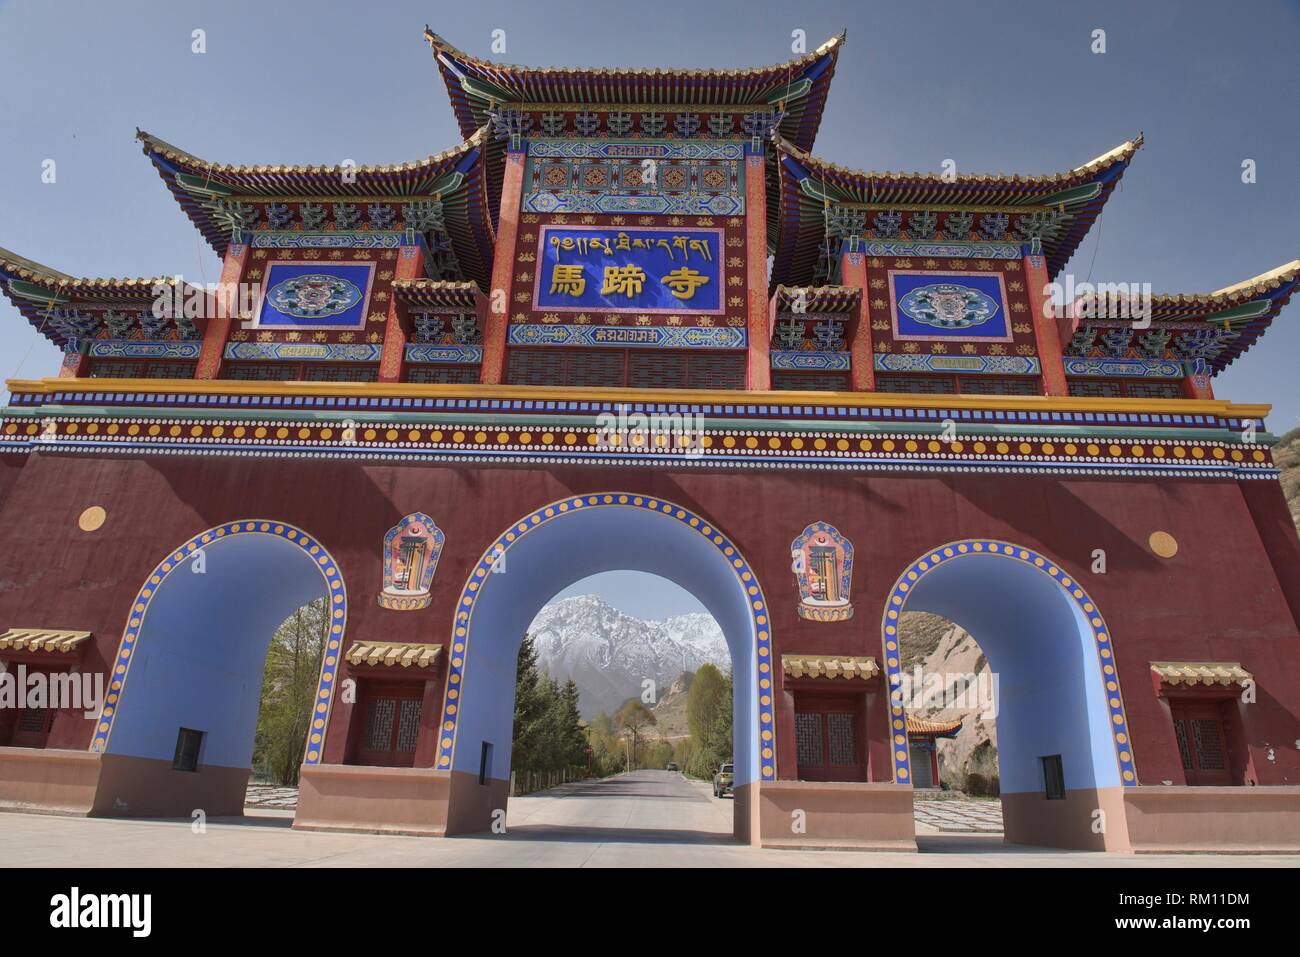 View of the Qilian Mountains from the Mati Si Temples, Gansu, China. Stock Photo